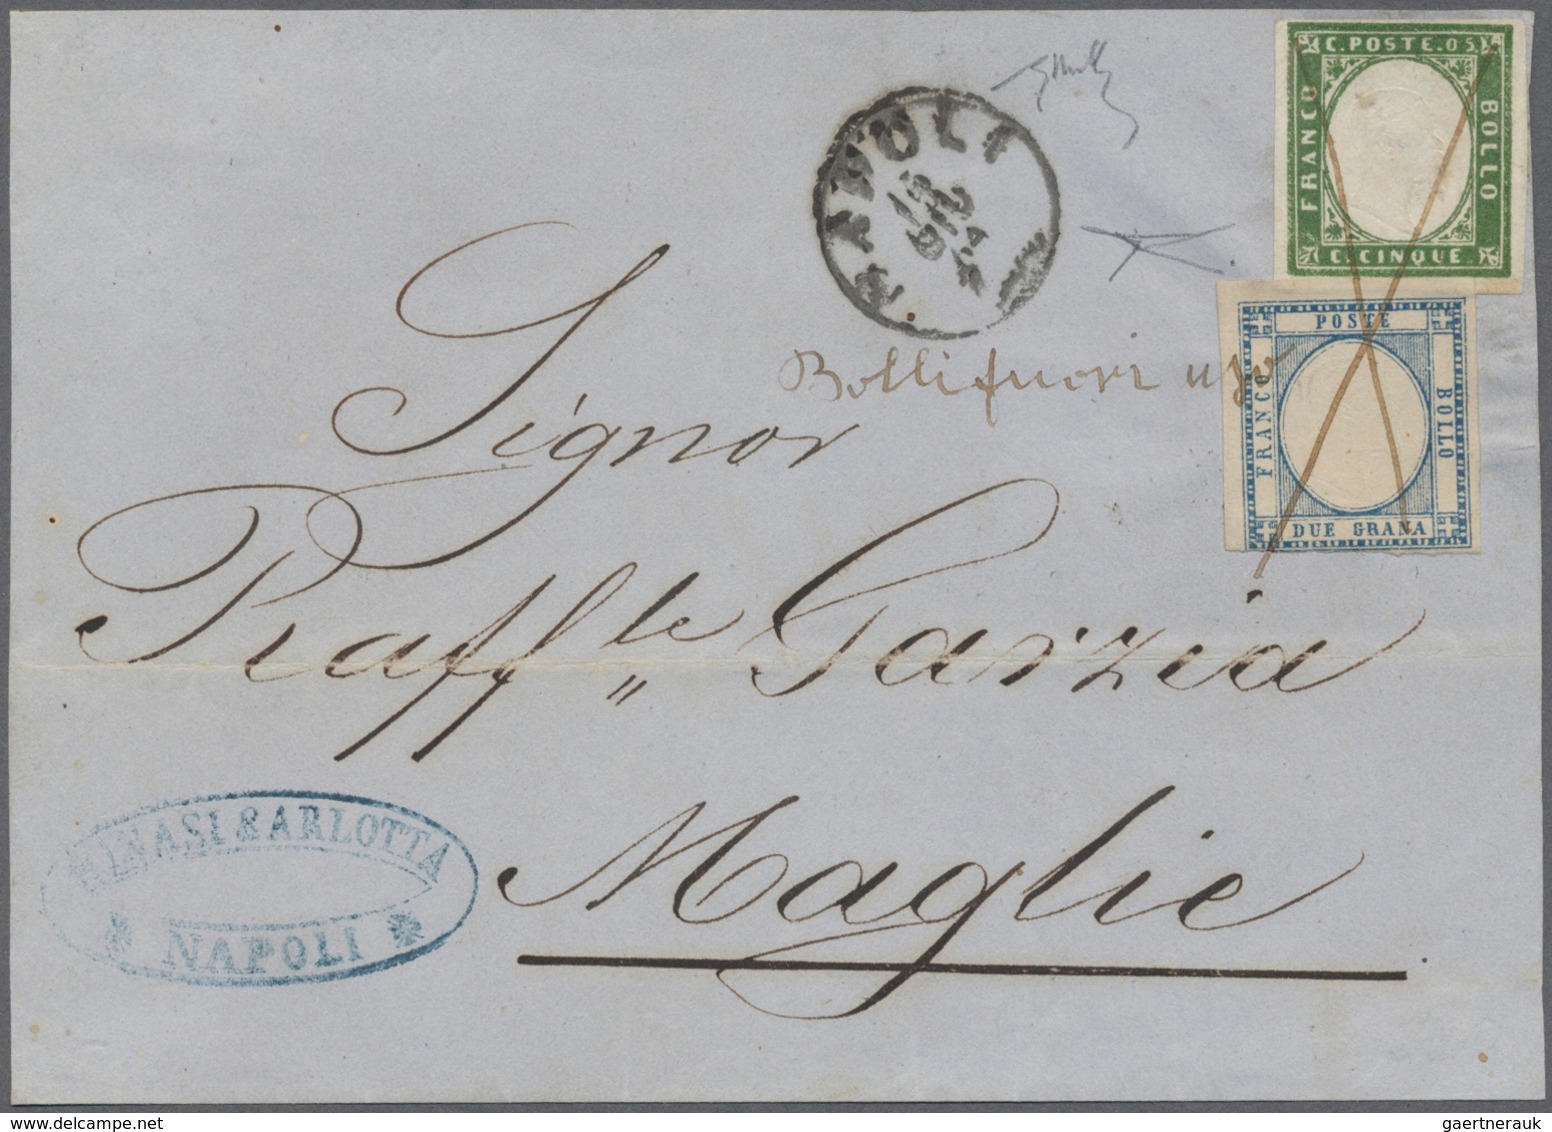 01053 Italien - Besonderheiten: 1864, Front Of A Cover From Naples To Maglie Franked With The Naples 2 Gra - Unclassified